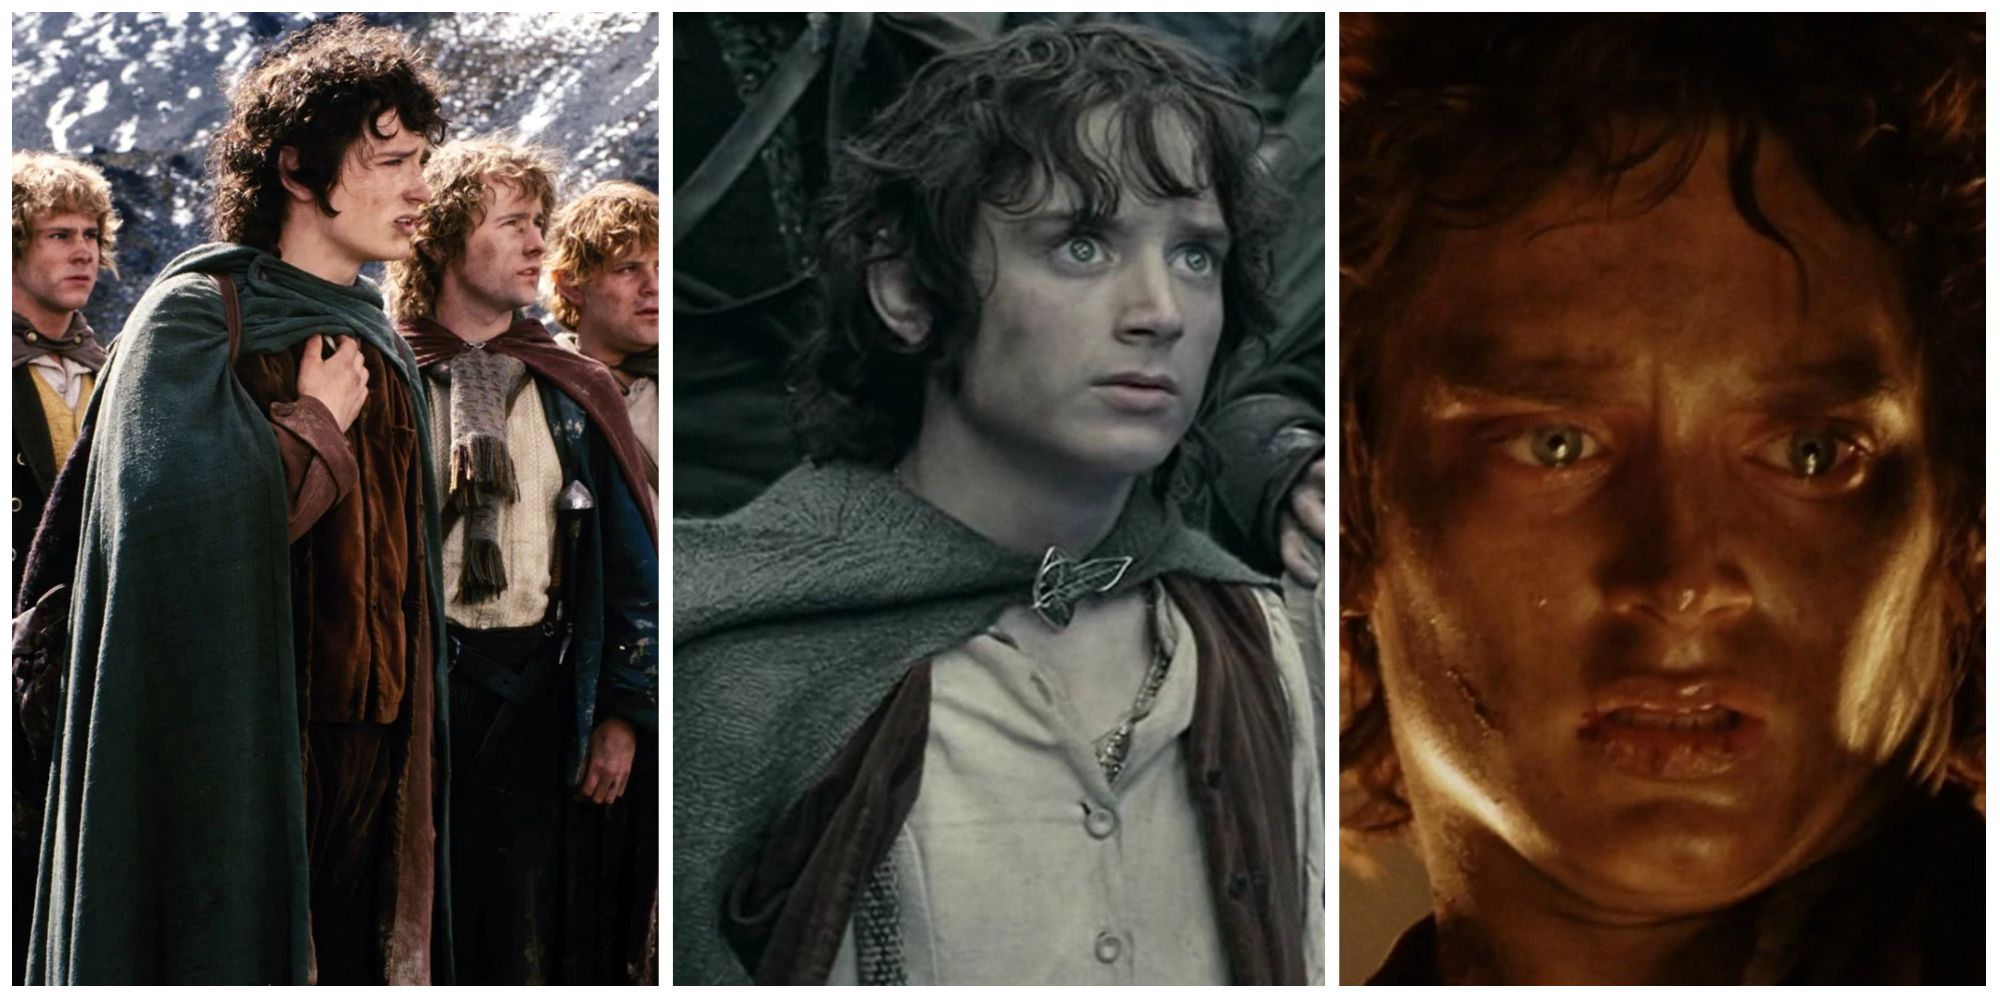 The Fellowship of the Ring. The Two Towers. Return of the King.